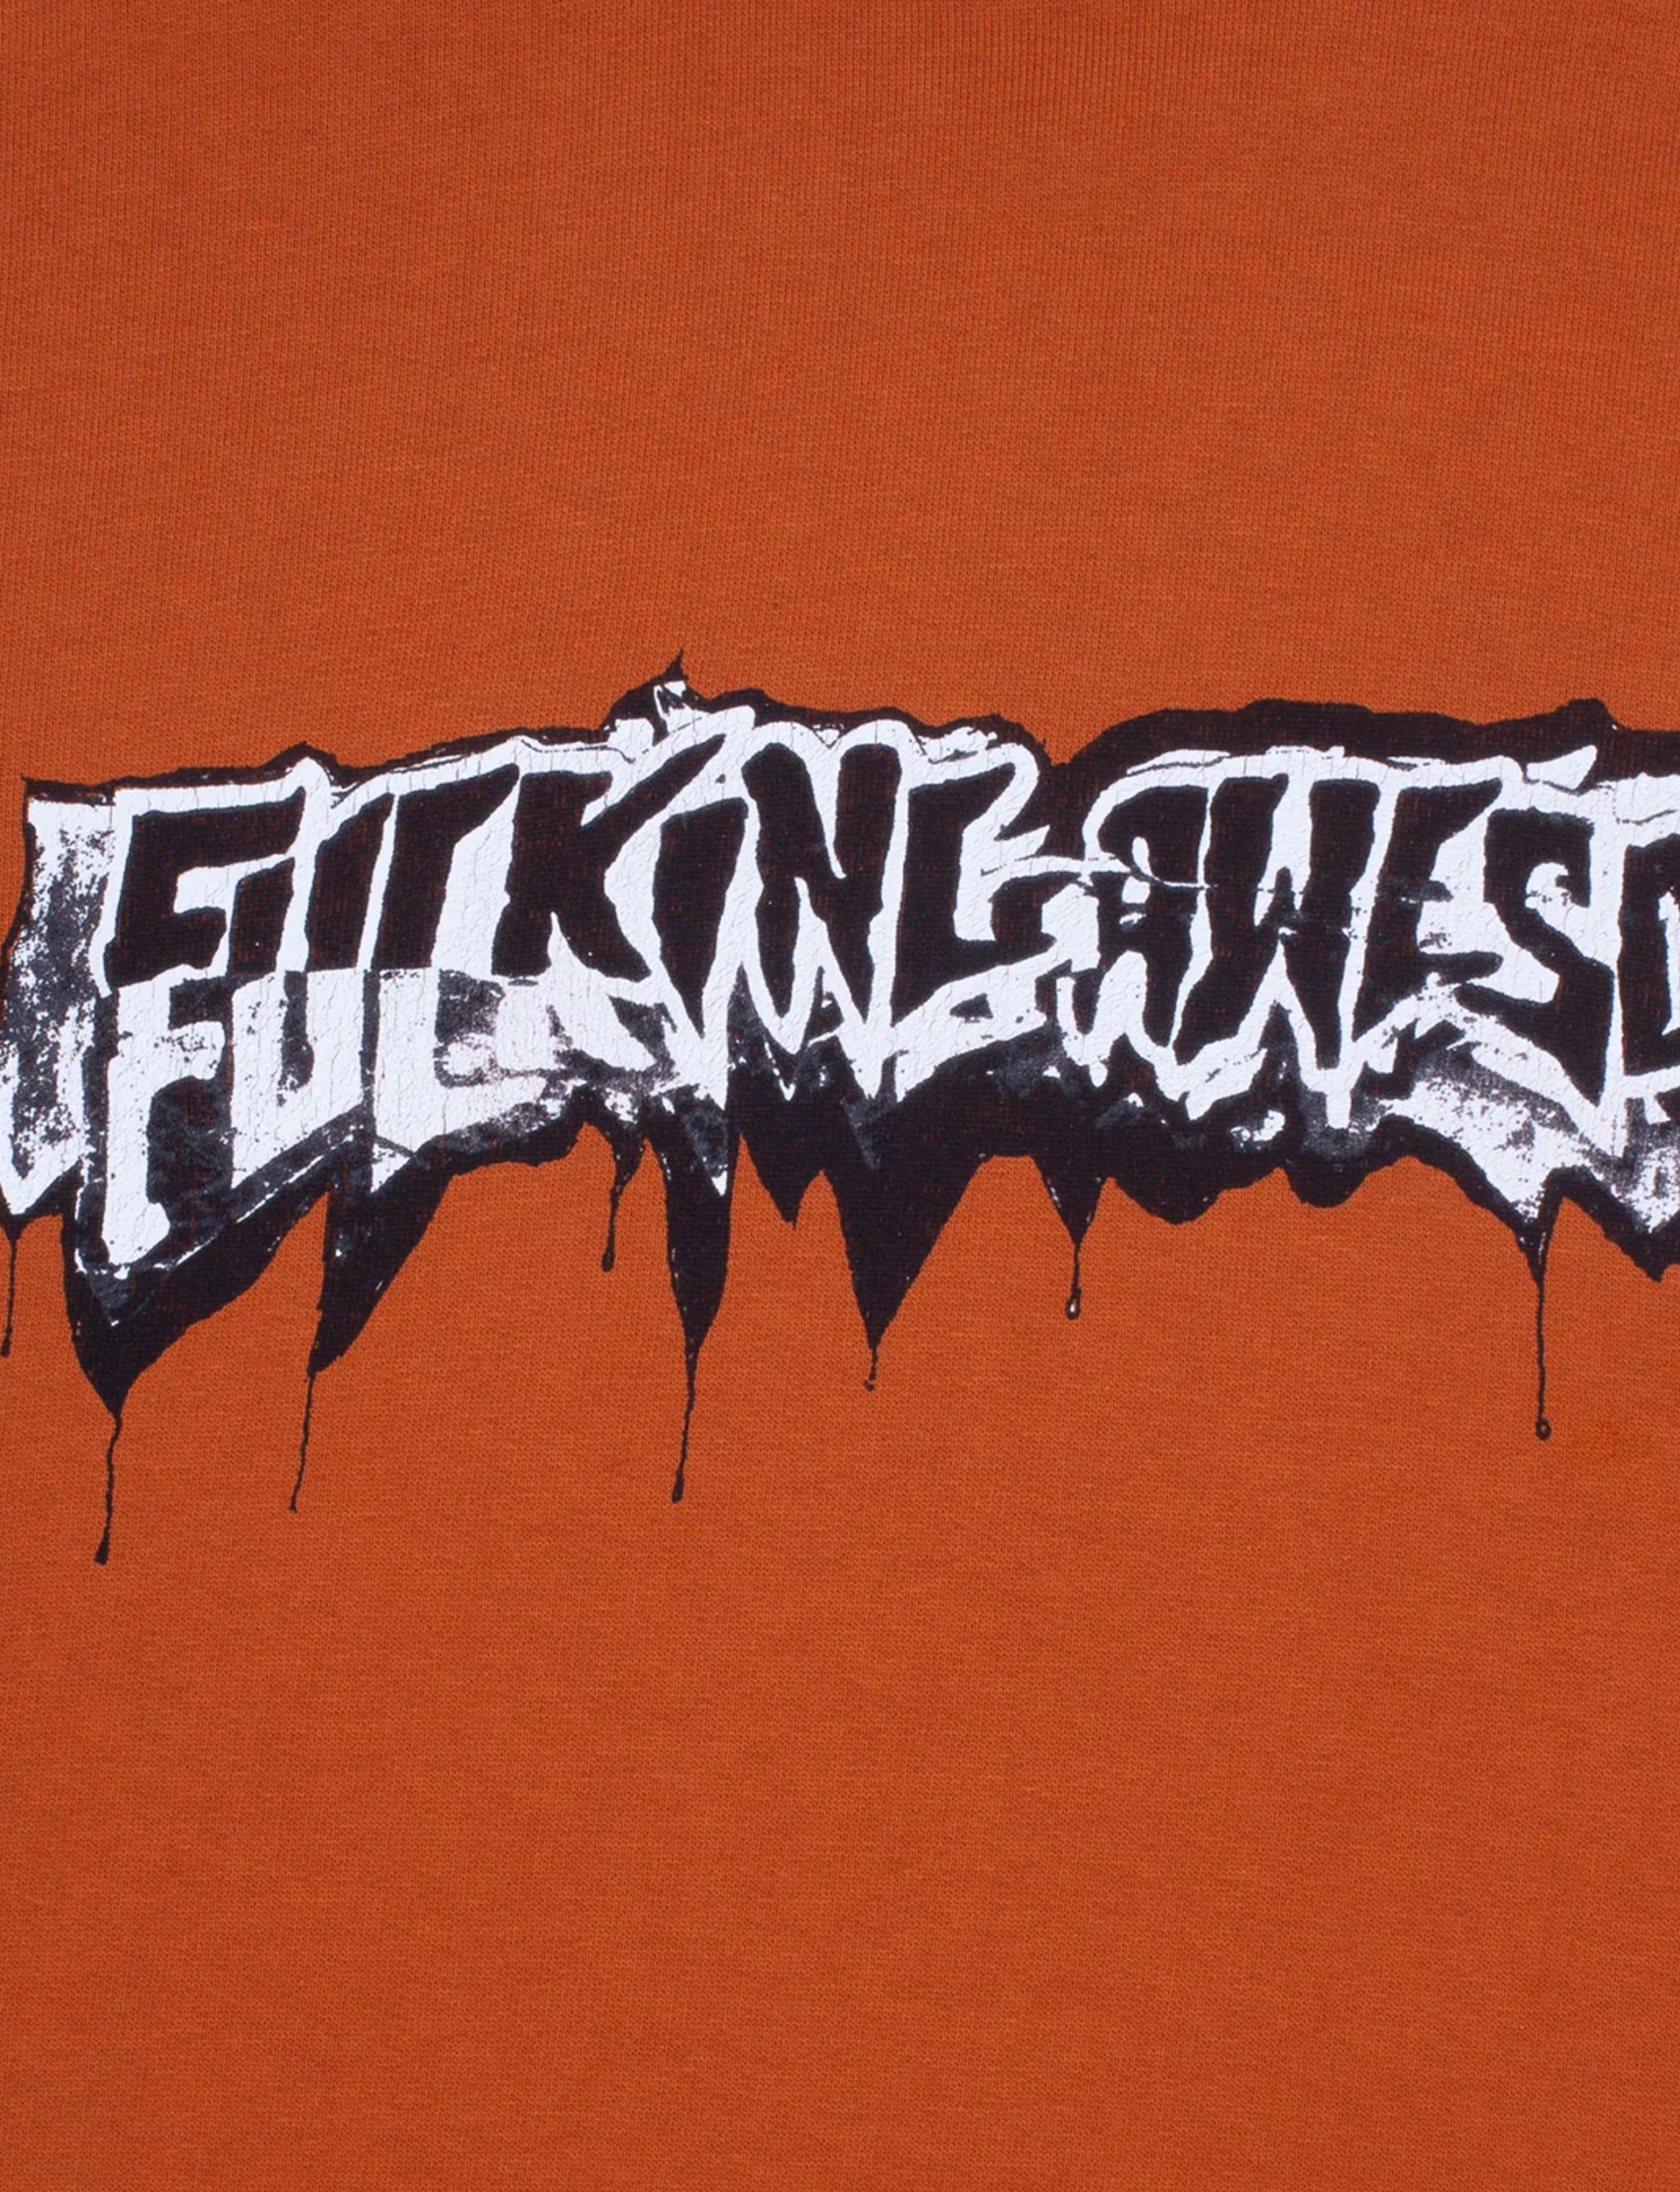 FUCKING AWESOME DILL CUT UP LOGO HOODIE BROWN